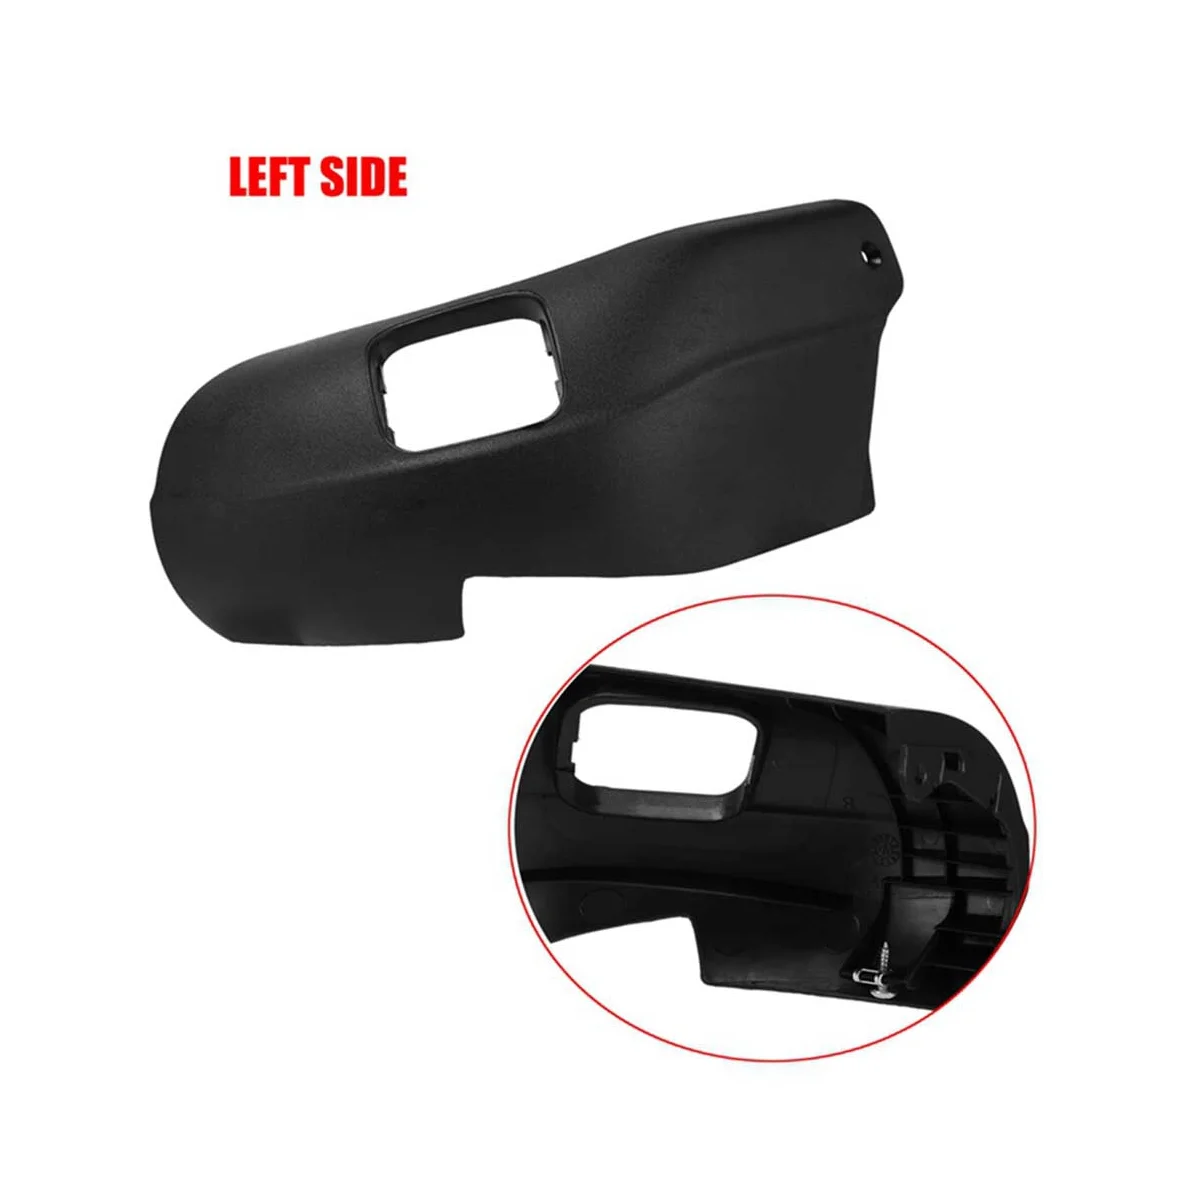 

1Pair L+R Seat Trim Cover for Mercedes Benz W220 S Class S600 S430 2000-2002 22091813309B51 22091814309B51